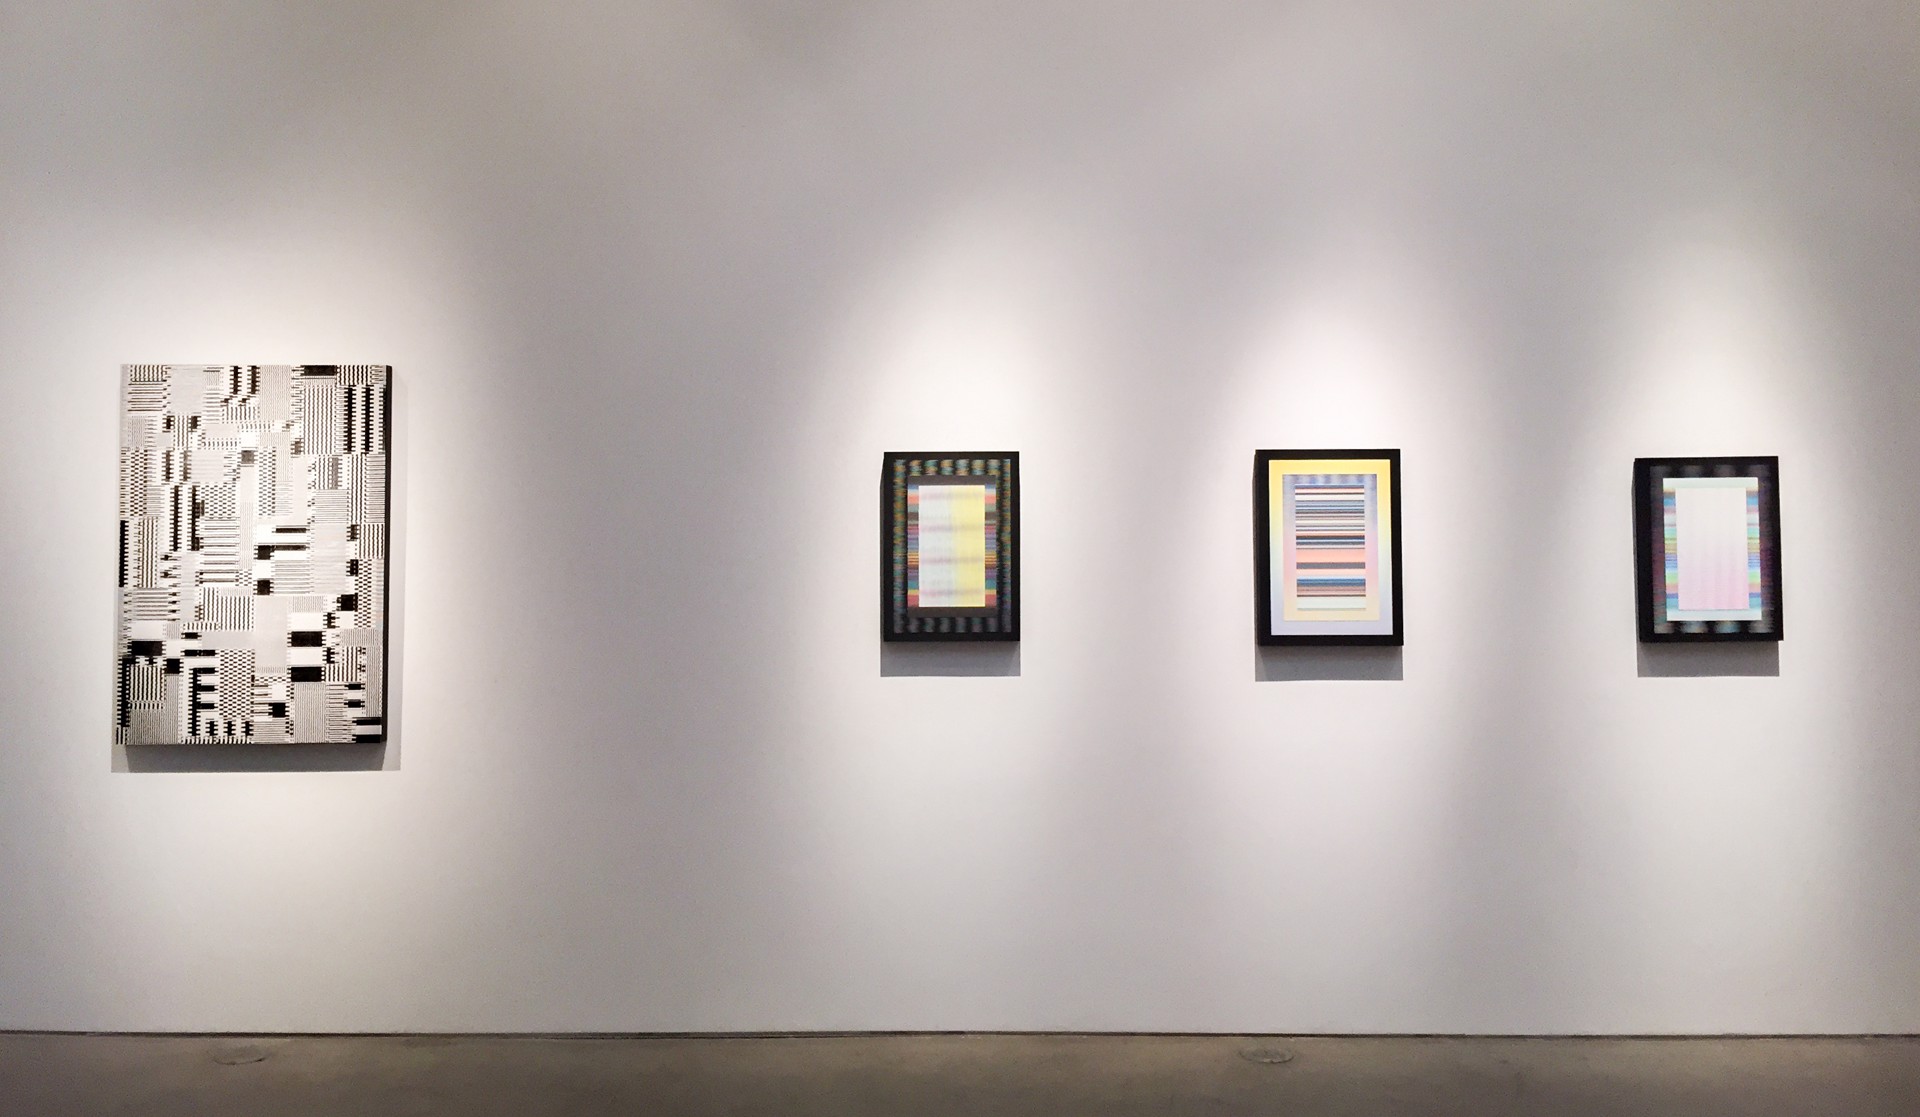 Left to right: Band Interlace I, Stripe Series 7, Stripe Series 9, Stripe Series 8 by Jon Vogt